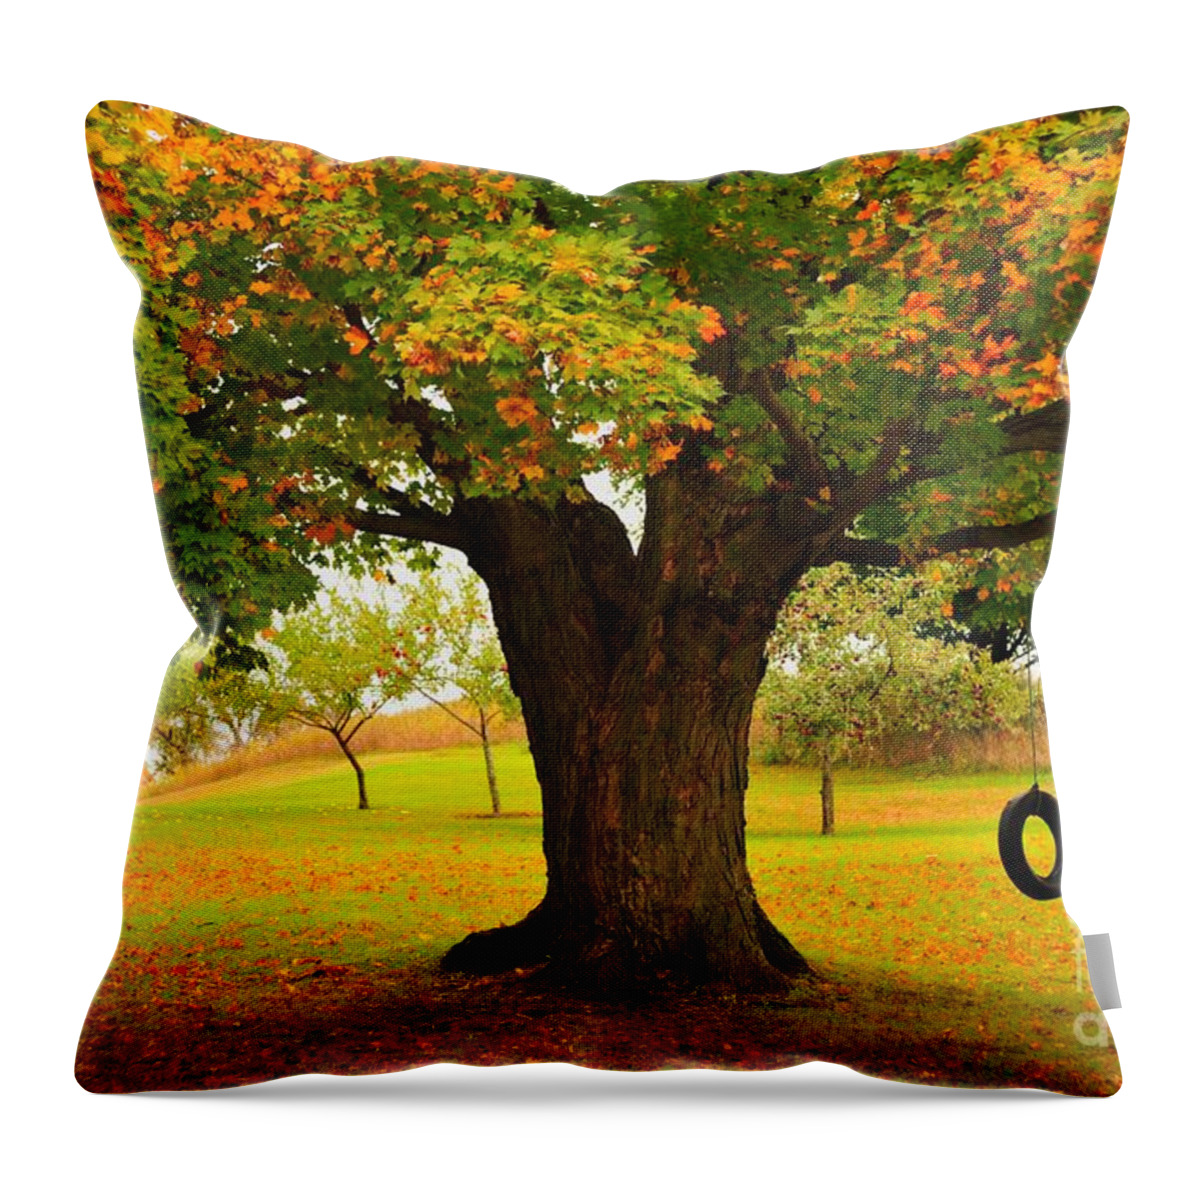 Tire Throw Pillow featuring the photograph Old Tire Swing by Terri Gostola